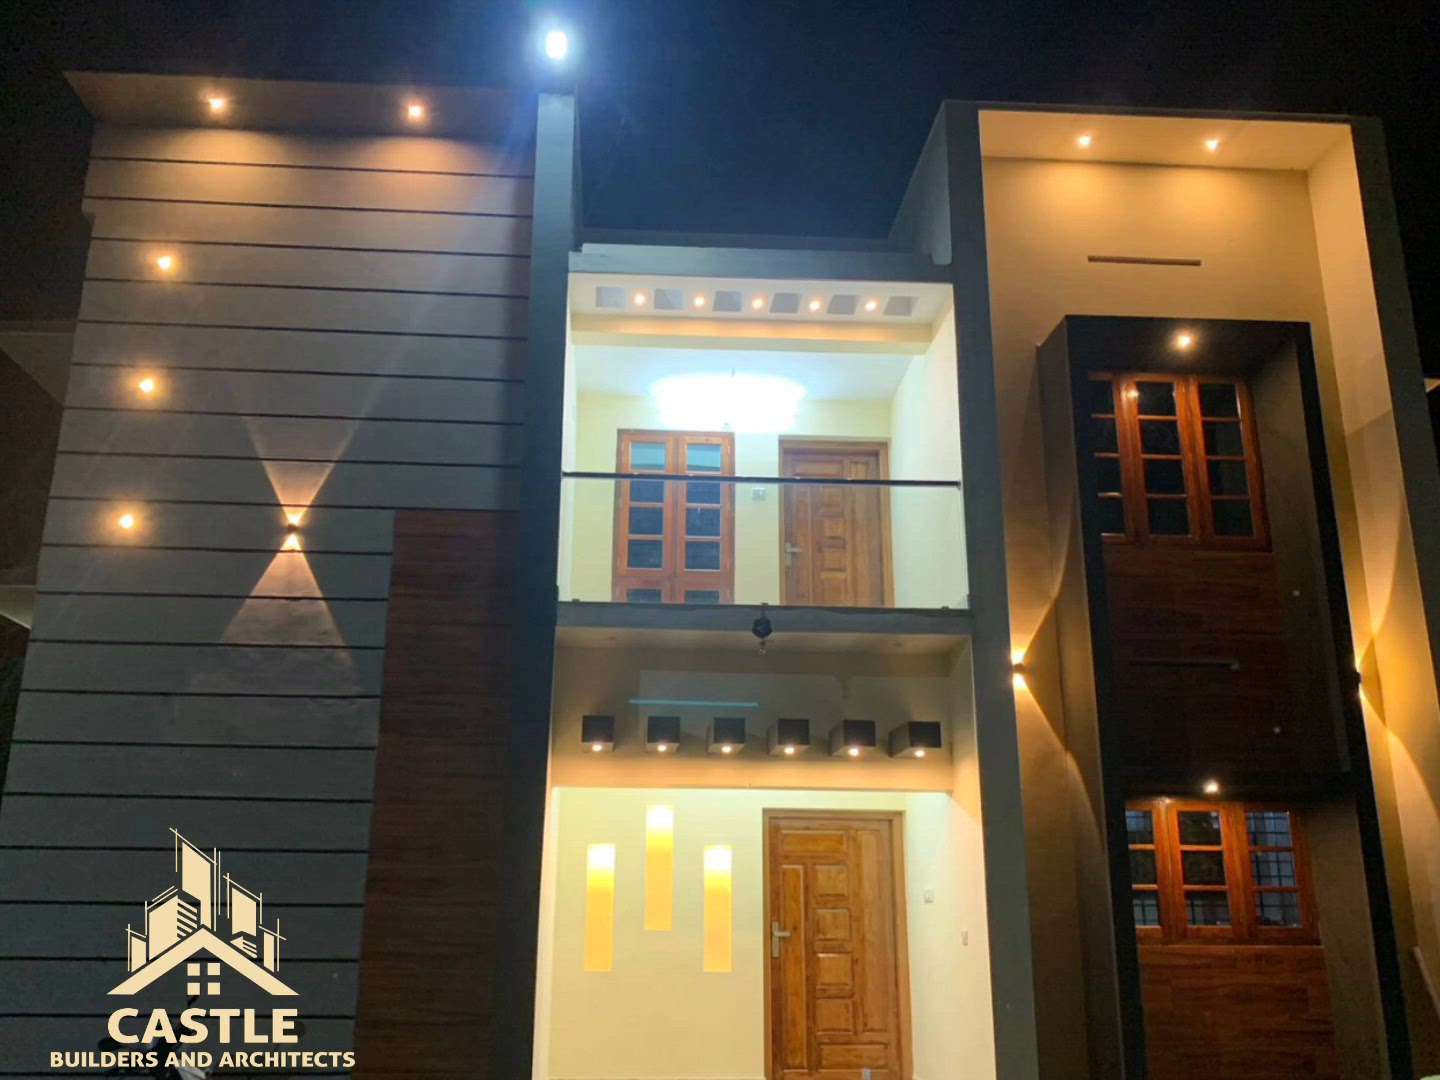 CASTLE BUILDERS AND ARCHITECTS.

Dream Home Construction in your own Property.

Construction cost-33 lakhs

4BHK Wire cut Redbricks/ 1553 SQFT

Interior works ( Marine ply & Laminates ) -Modular kitchen, Wash area counter unit, Stair Bottom Door.

Ground floor- 830 SQFT (Sitout, 2 Bedrooms with attached Bathrooms, Living cum Dining area, Kitchen, Stair area.)

First Floor- 723 SQFT ( Balcony, 2 Bedrooms with attached Bathrooms, Living area, Open terrace.)

For more Details contact-8289844170

Castle Builders and Architects, Mukkampalamood, Naruvamood P O. Operate & Supervision by Engineers.

 #ContemporaryHouse  #KeralaStyleHouse #Thiruvananthapuram #Venganoor  #BestBuildersInKerala